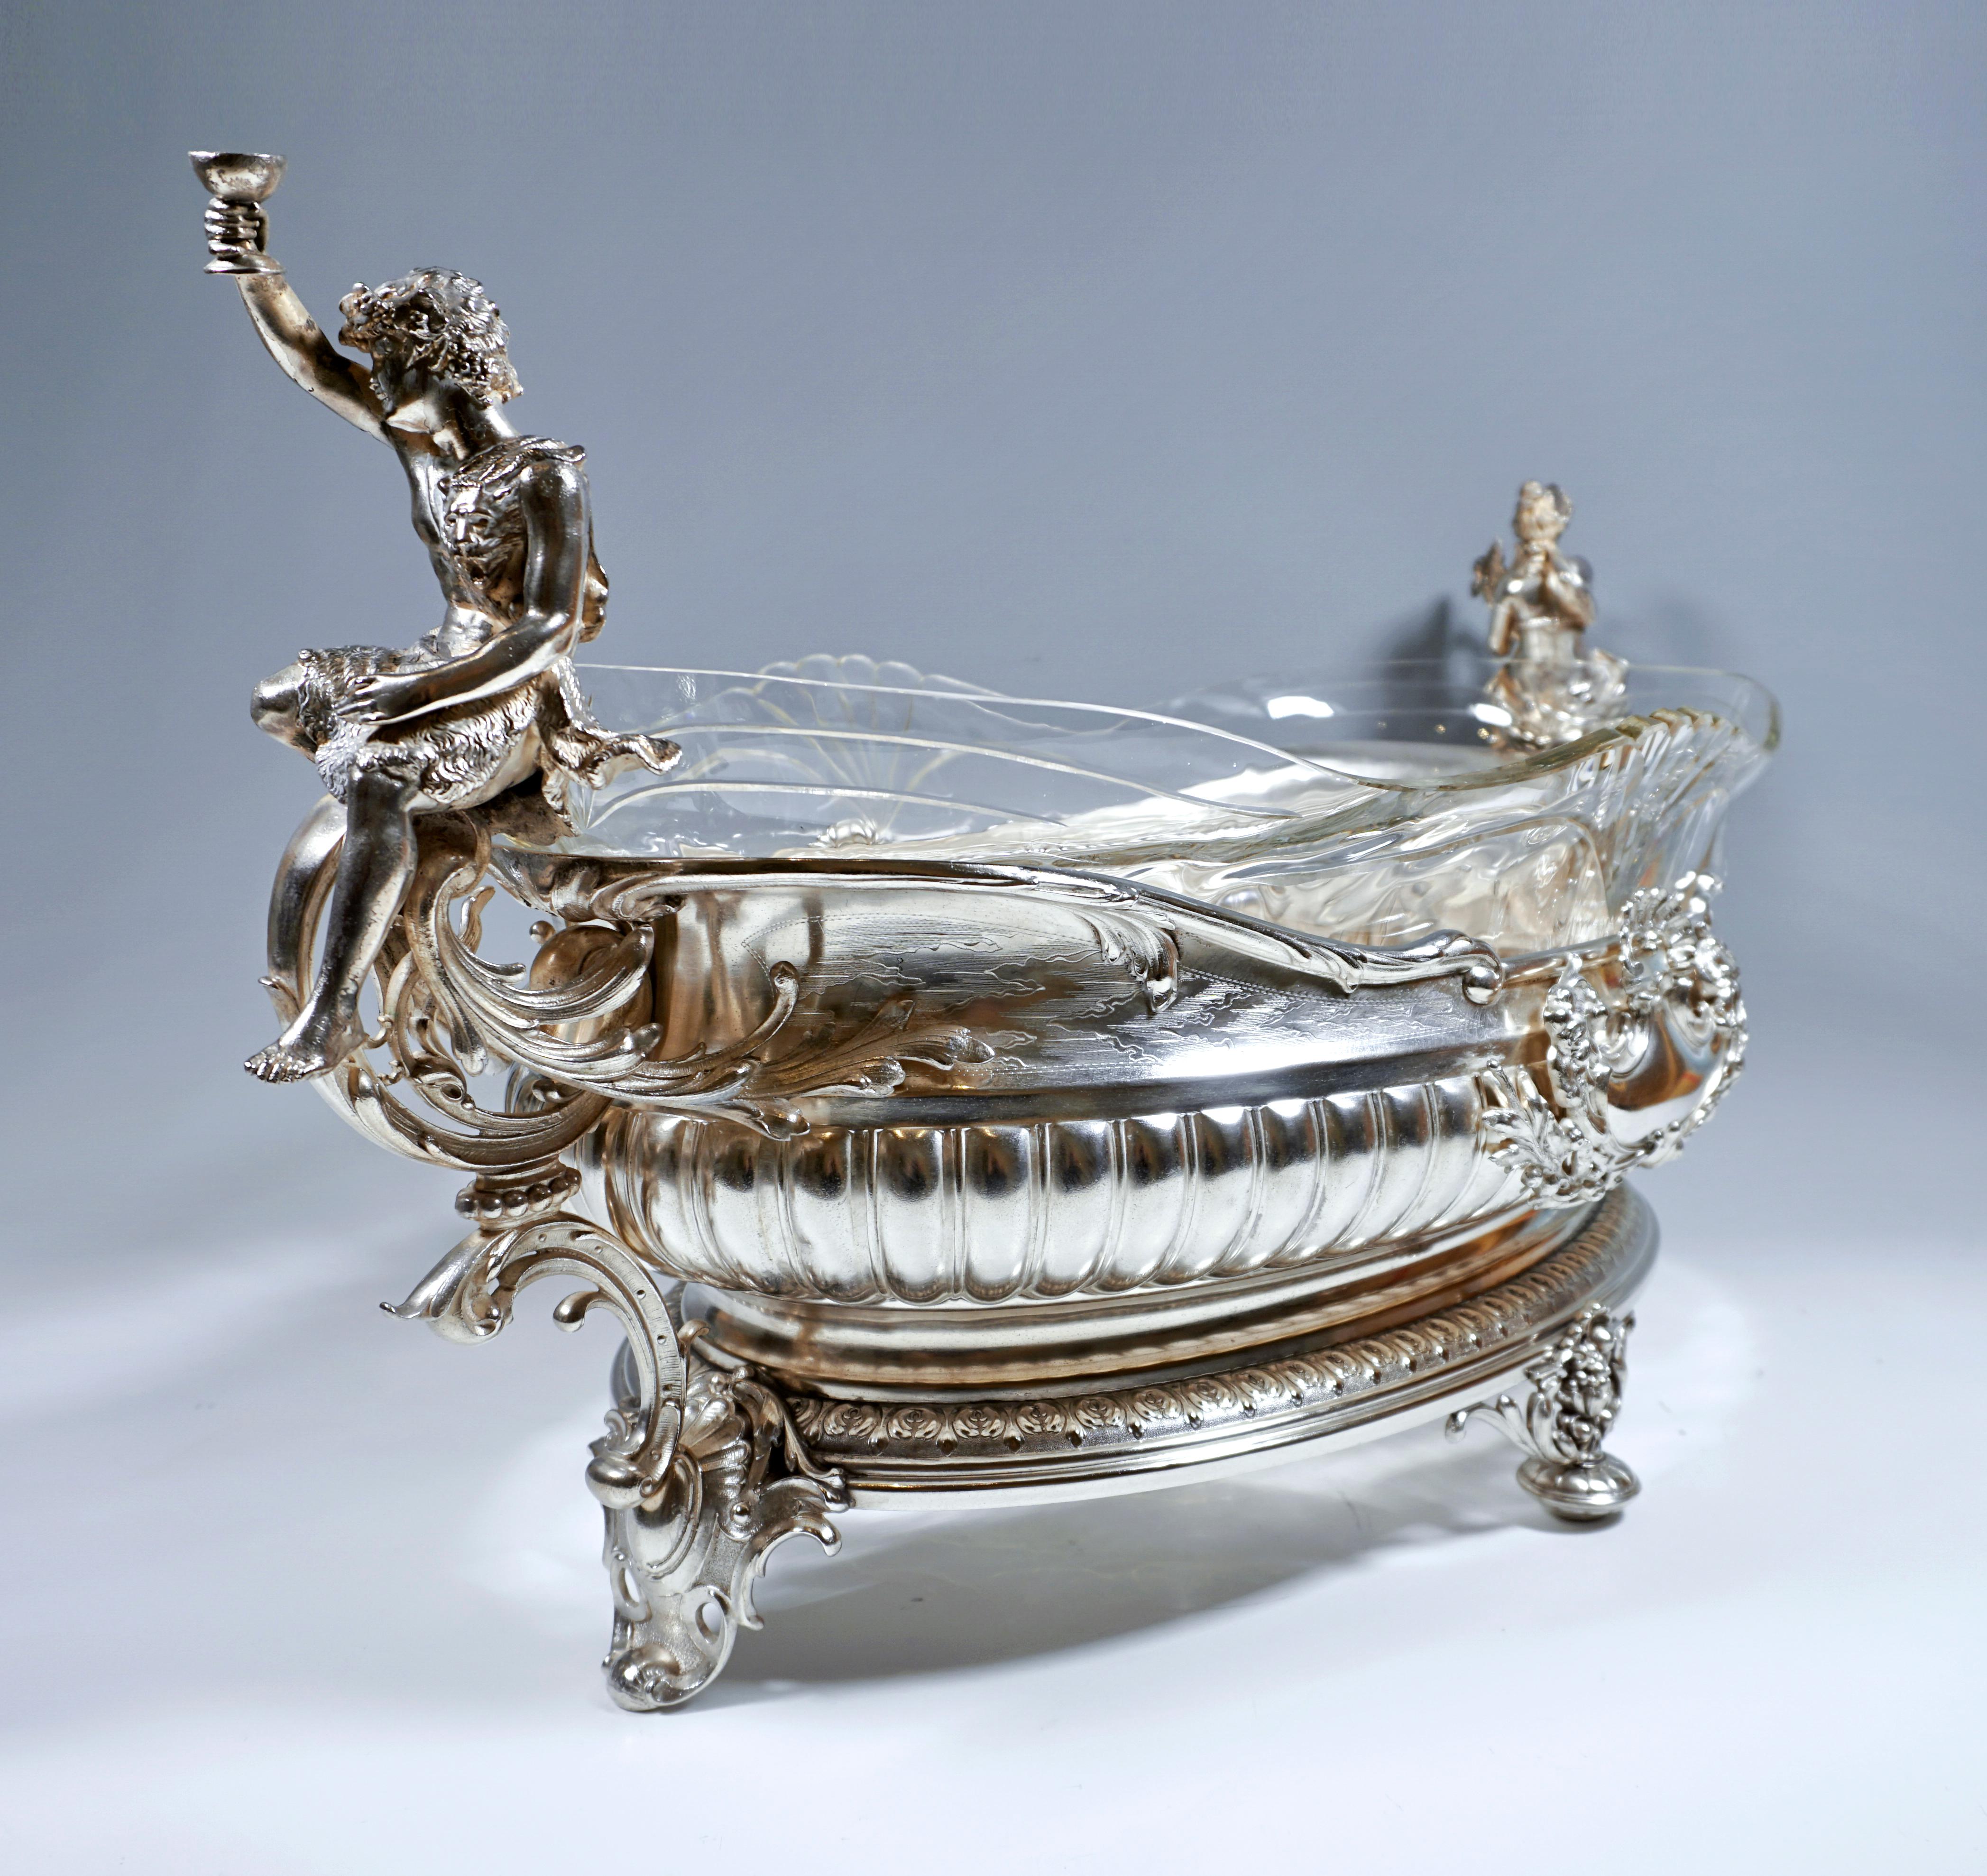 Early 20th Century Large Art Nouveau Splendid Flower Dish with Bacchants, WMF Germany, 1906